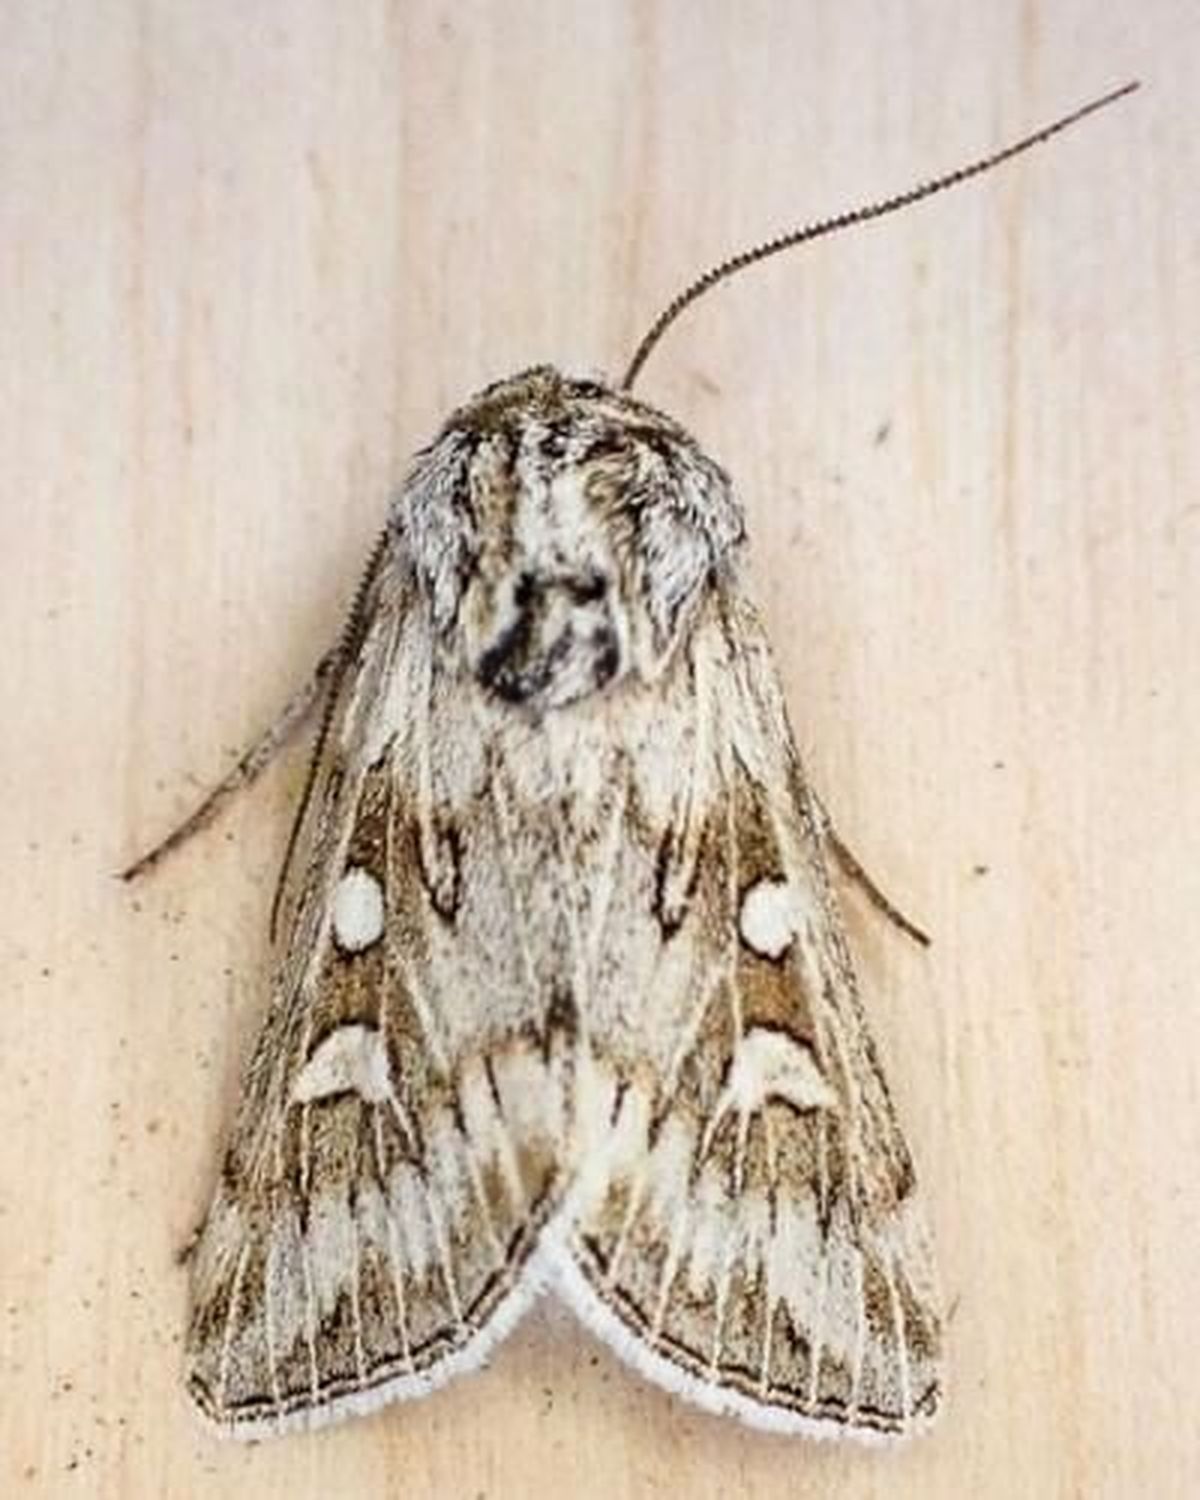 Citizen Science - Montana Moth Project - Northern Rockies Research